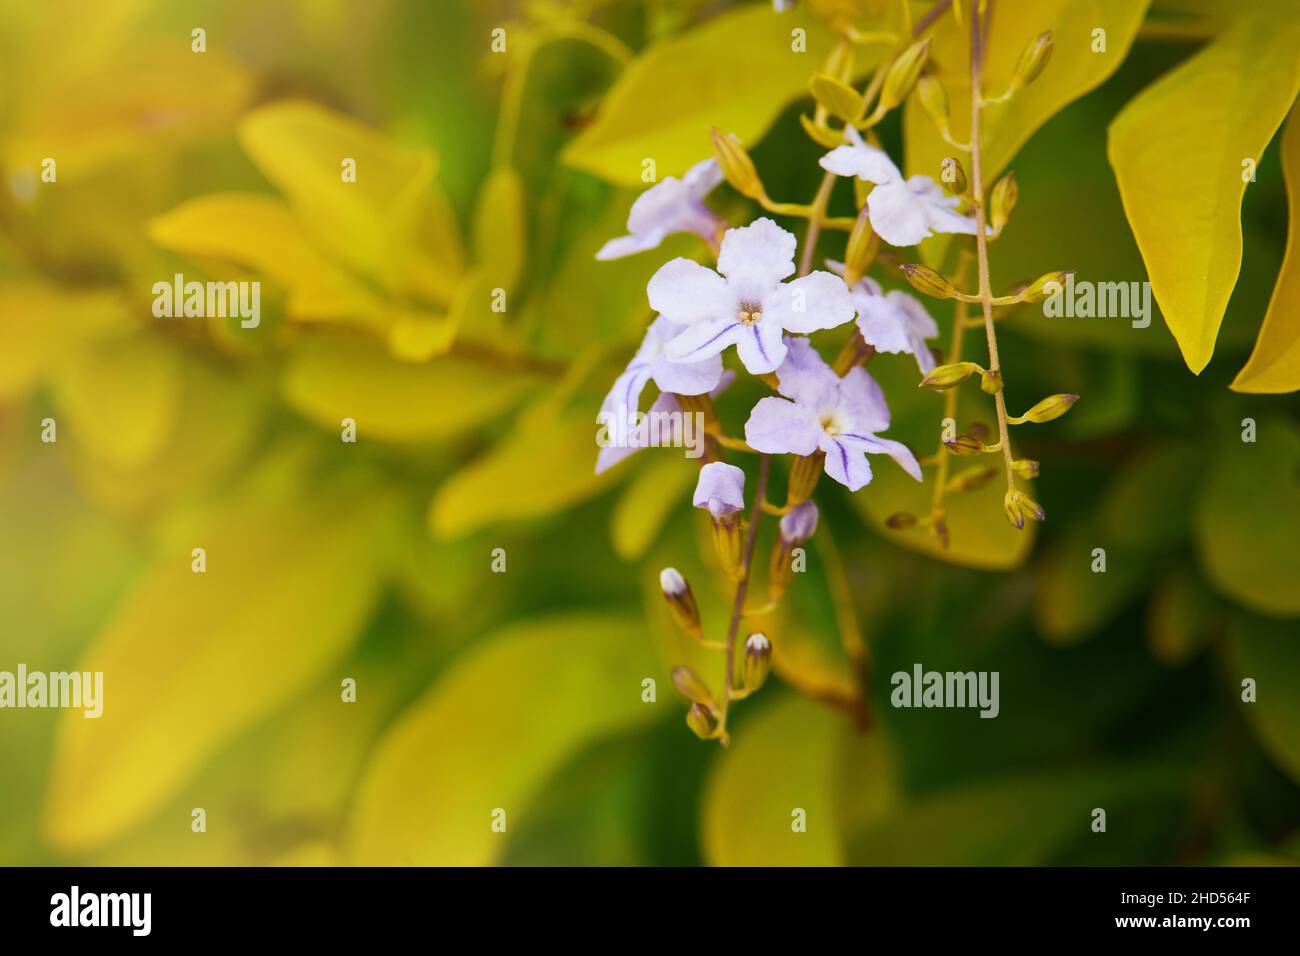 Close up of purple flowers of Duranta repens on blurred yellow leaves background. Pigeon berry Stock Photo